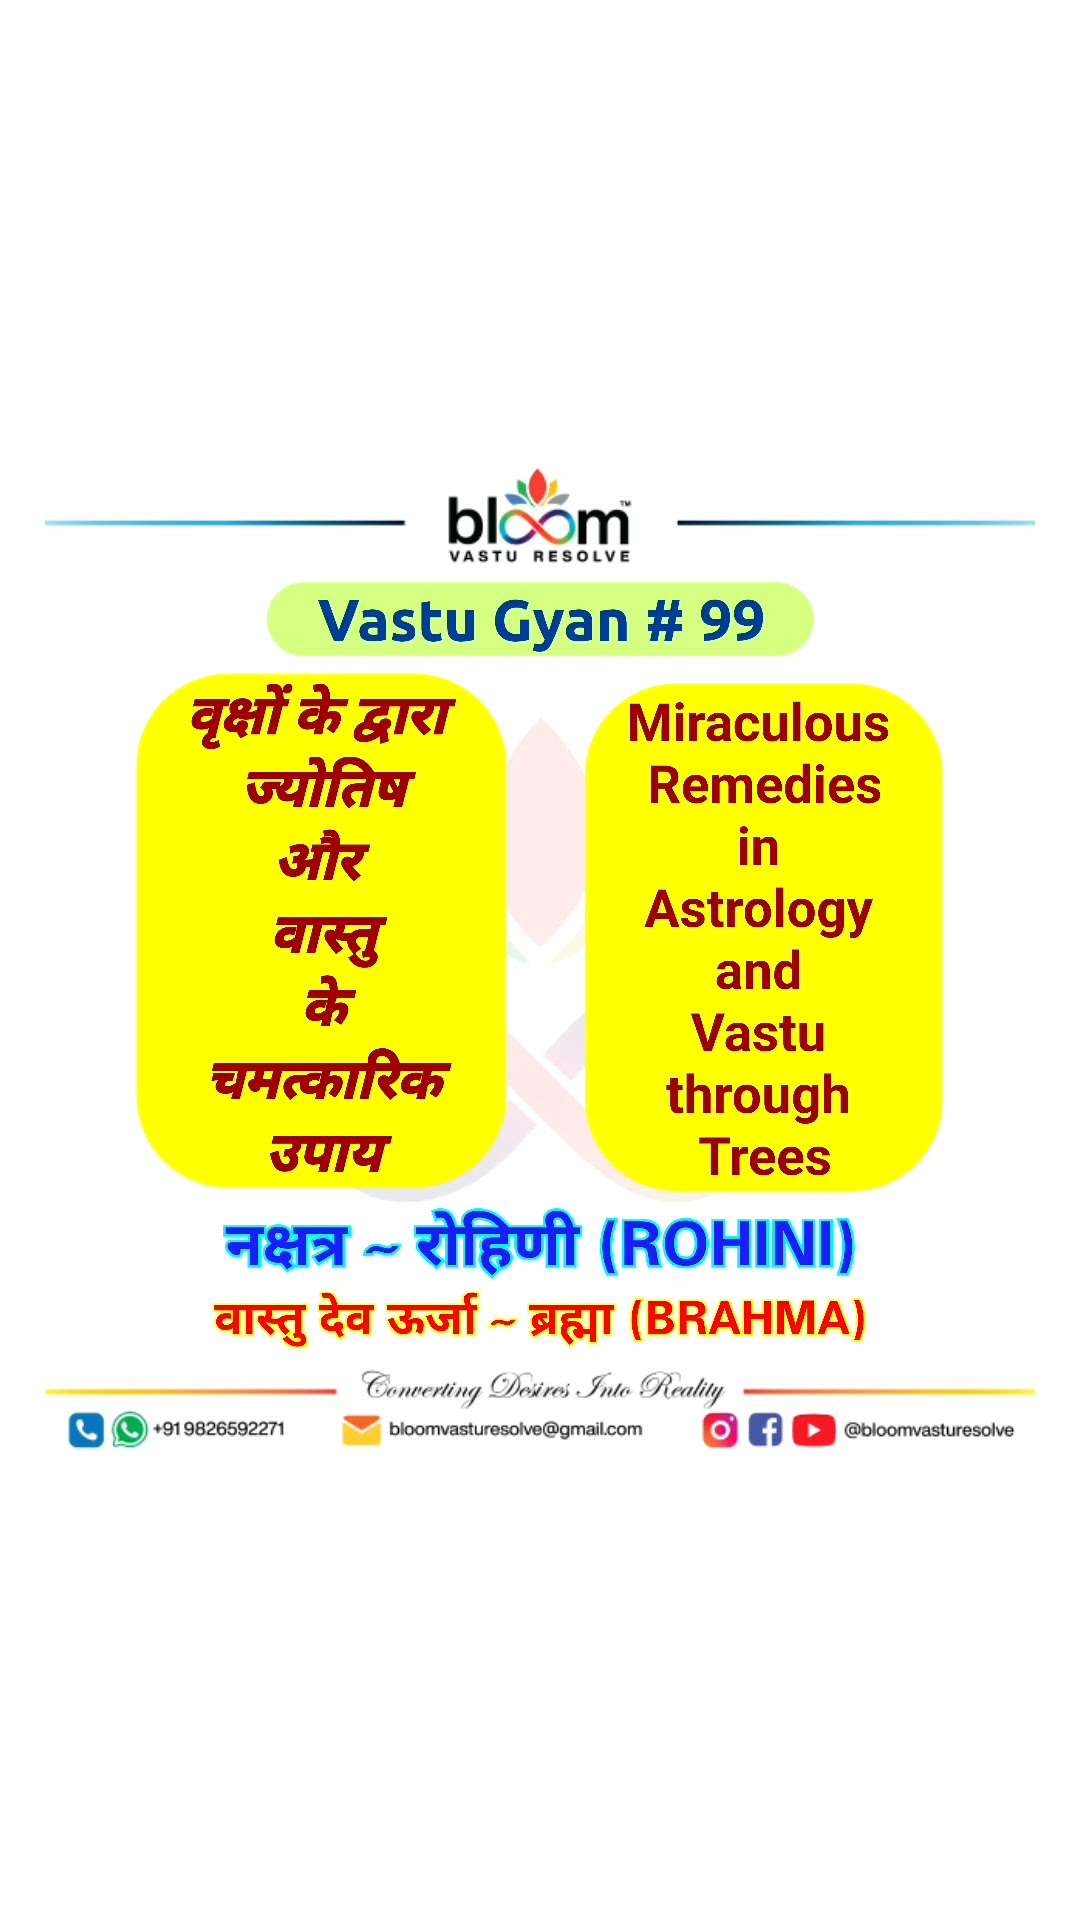 Which Nakshatra tree do you want to know, kindly write in the comment box.

For more Vastu please follow @bloomvasturesolve
on YouTube, Instagram & Facebook
.
.
For personal consultation, feel free to contact certified MahaVastu Expert through
M - 9826592271
Or
bloomvasturesolve@gmail.com

#vastu 
#mahavastu 
#mahavastuexpert
#bloomvasturesolve
#BirthConstellationTree
#vasturemedies
#astrovastu
#astrology
#DivineEnergyRemedy
#Sacredtree
#rohini
#brahma
#जामुन
#black_plum
#indian_blackberry